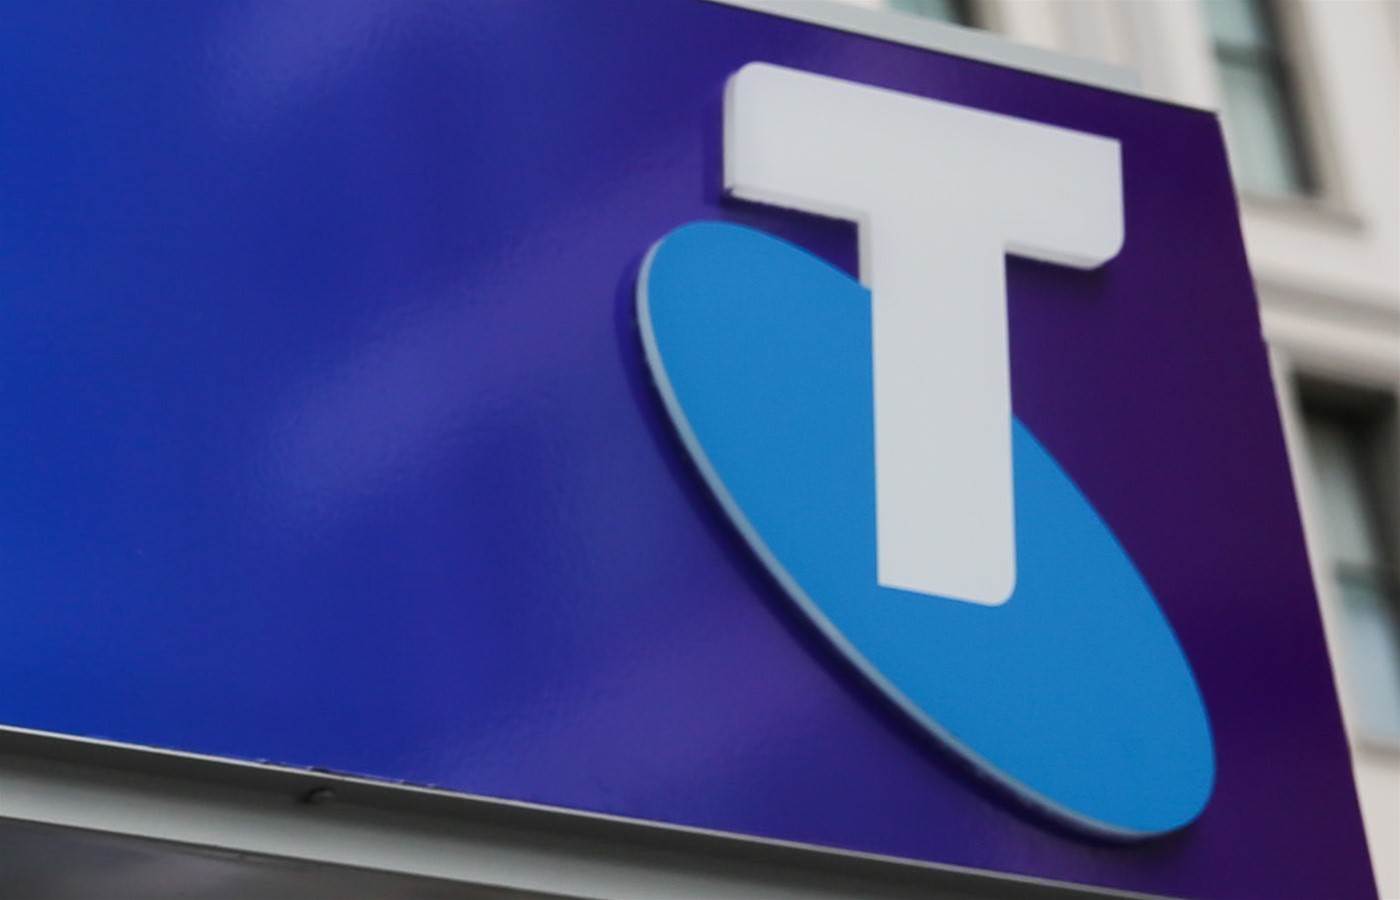 Telstra taps Digital Victoria exec to lead IT strategy and transformation